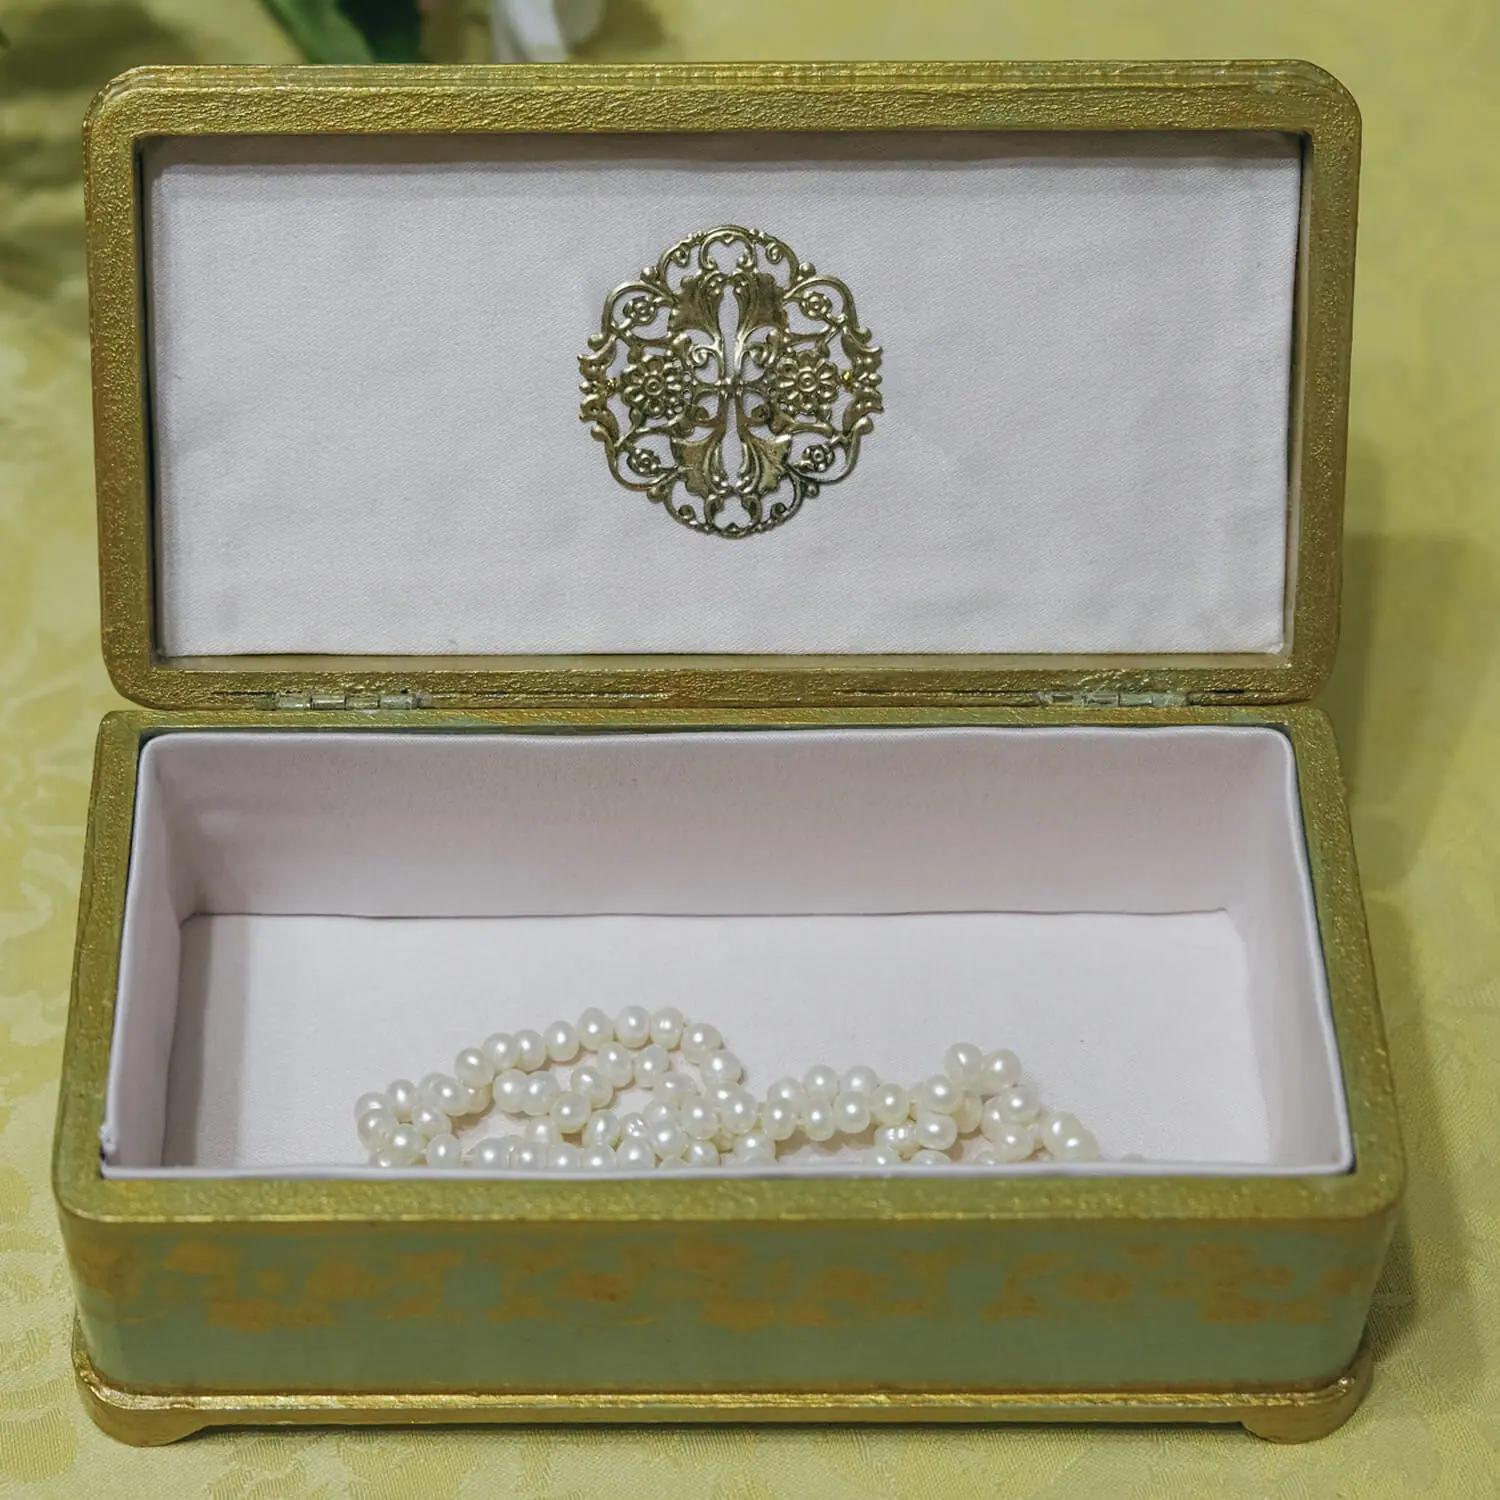 For your attention is a jewelry box that can be used to keep jewelry and money. Made of organic wood and eco-friendly materials. A wooden casket can be used both for money box adult and jewelry box, tarot card box and for other personal needs.